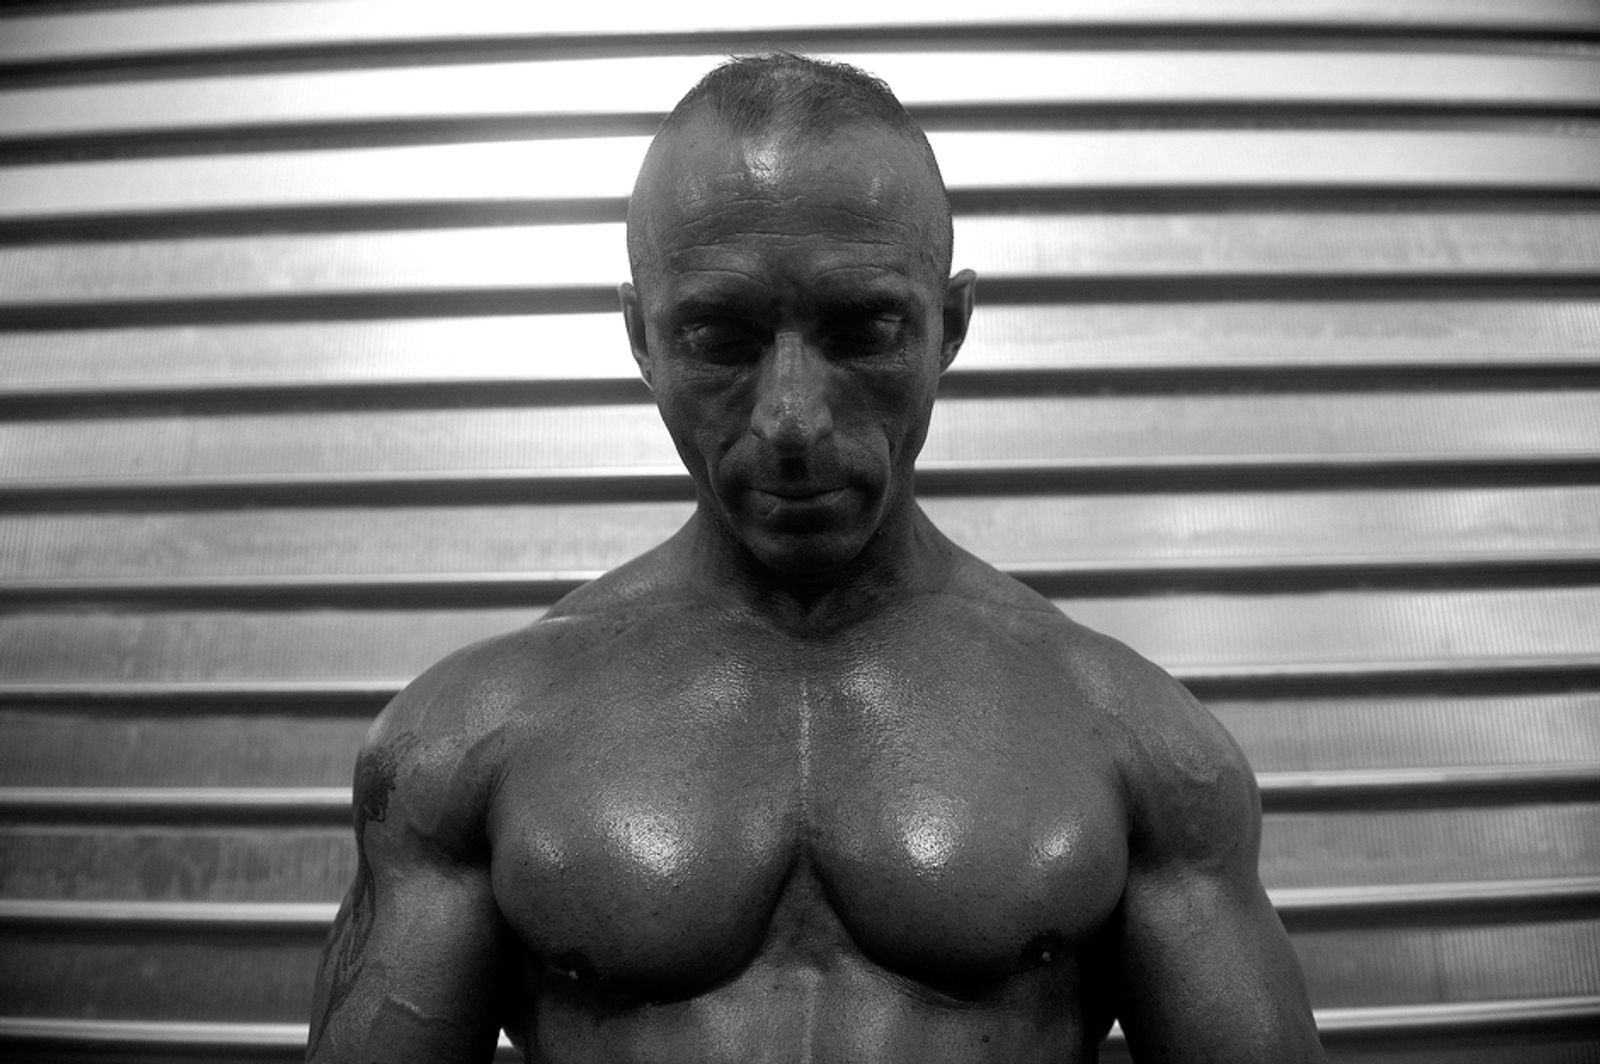 © Mauro Pimentel - Image from the Muscles factory photography project